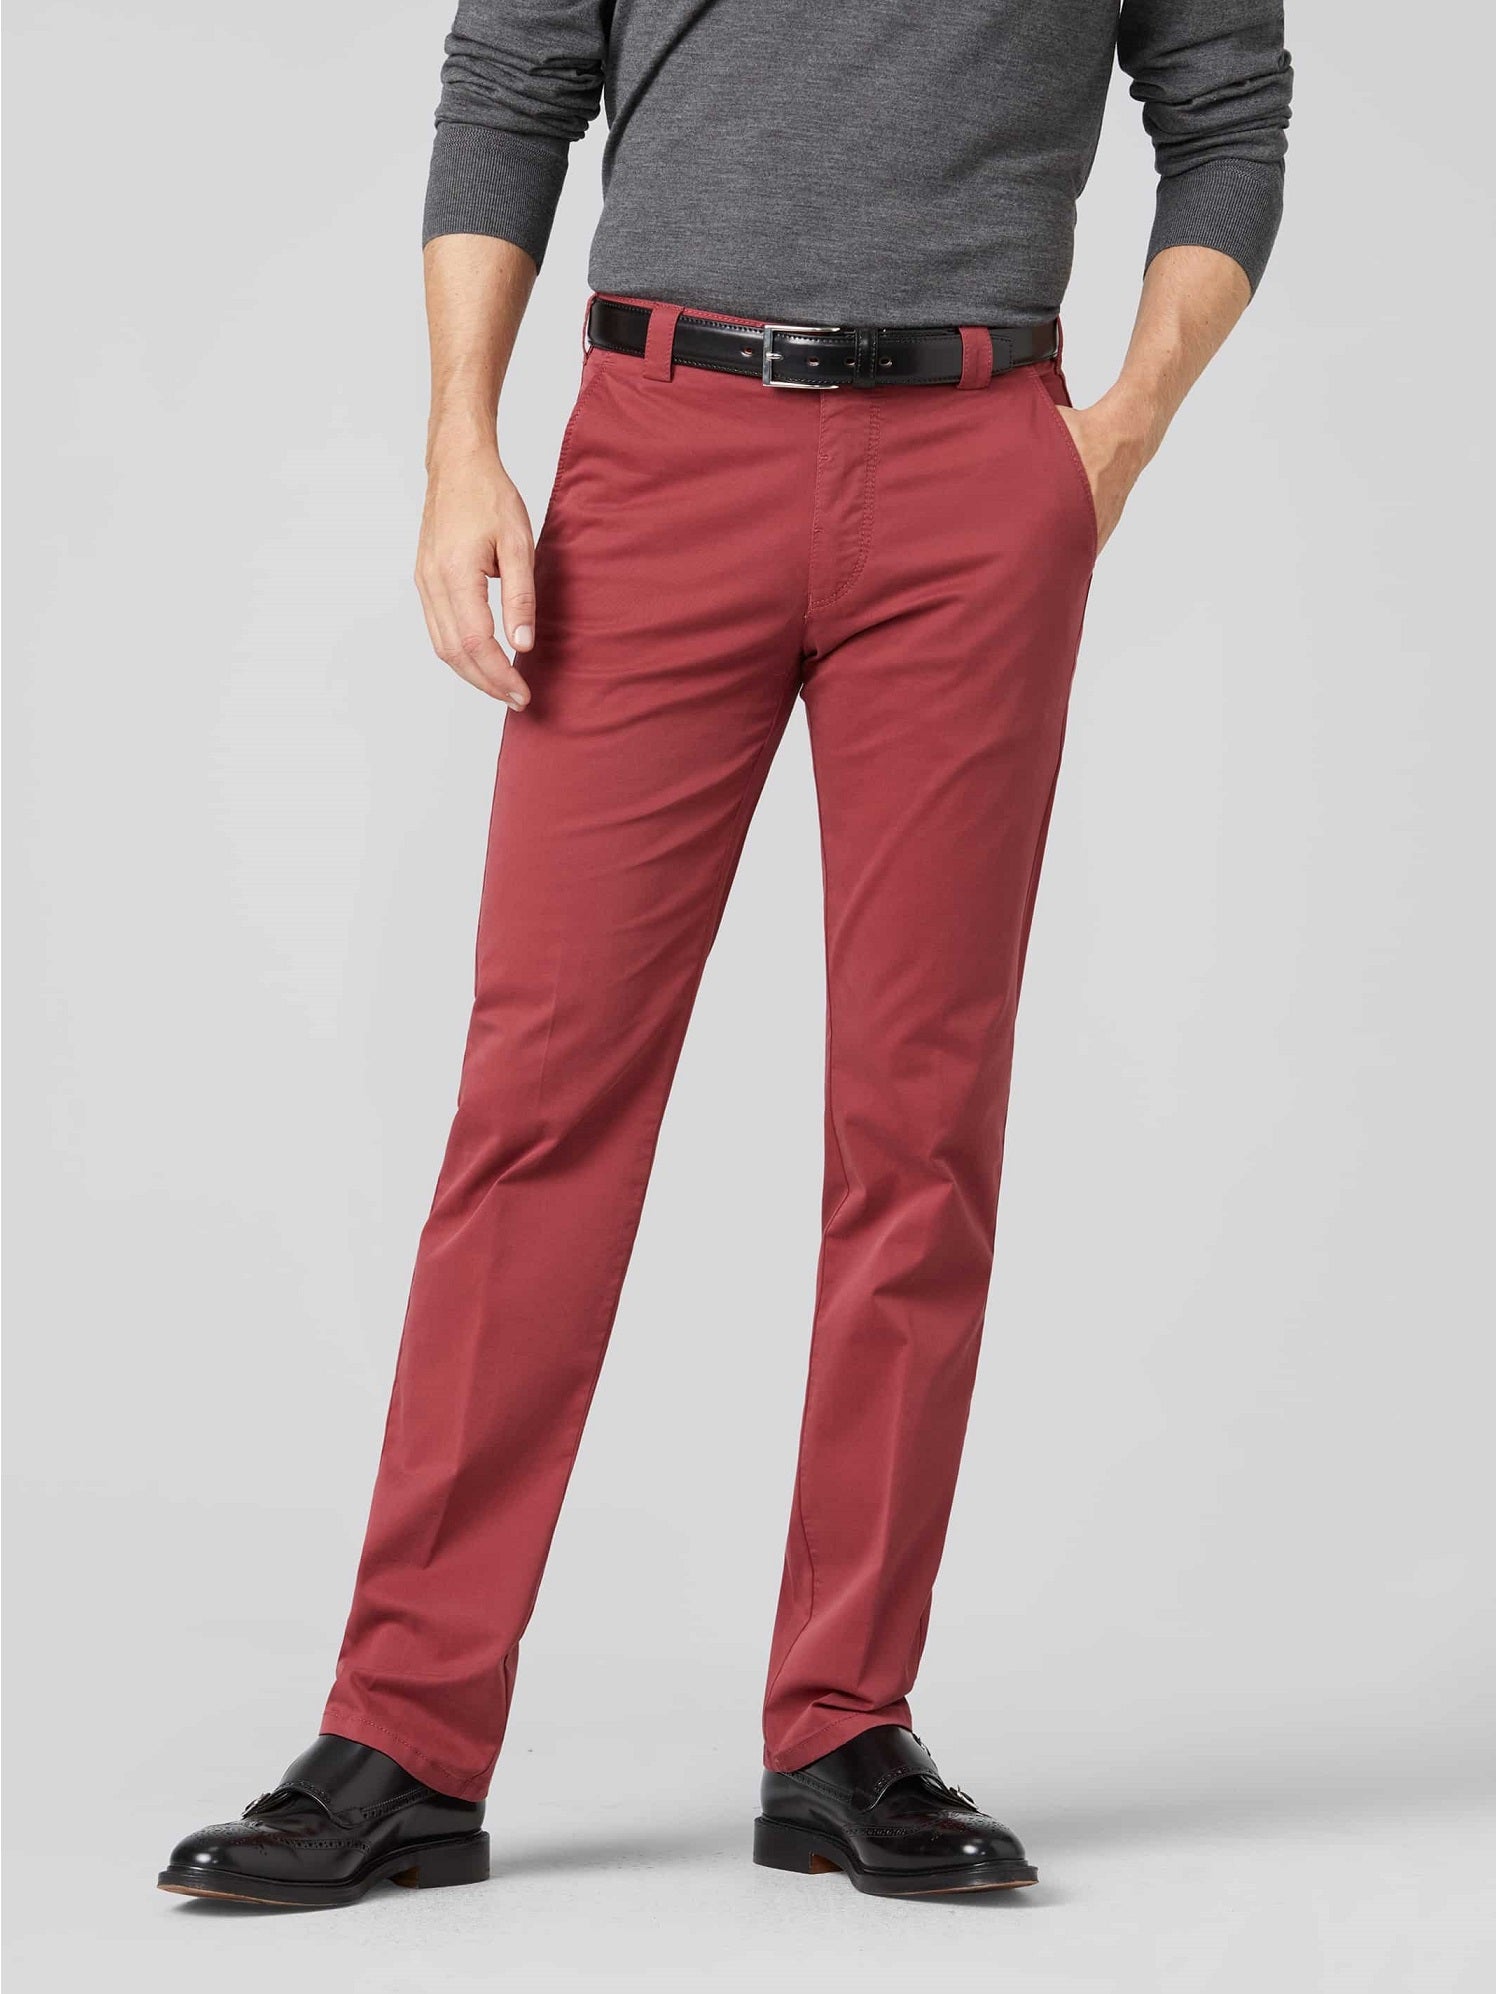 MEYER Trousers - Roma 3001 Light-Weight Cotton Chinos - Red